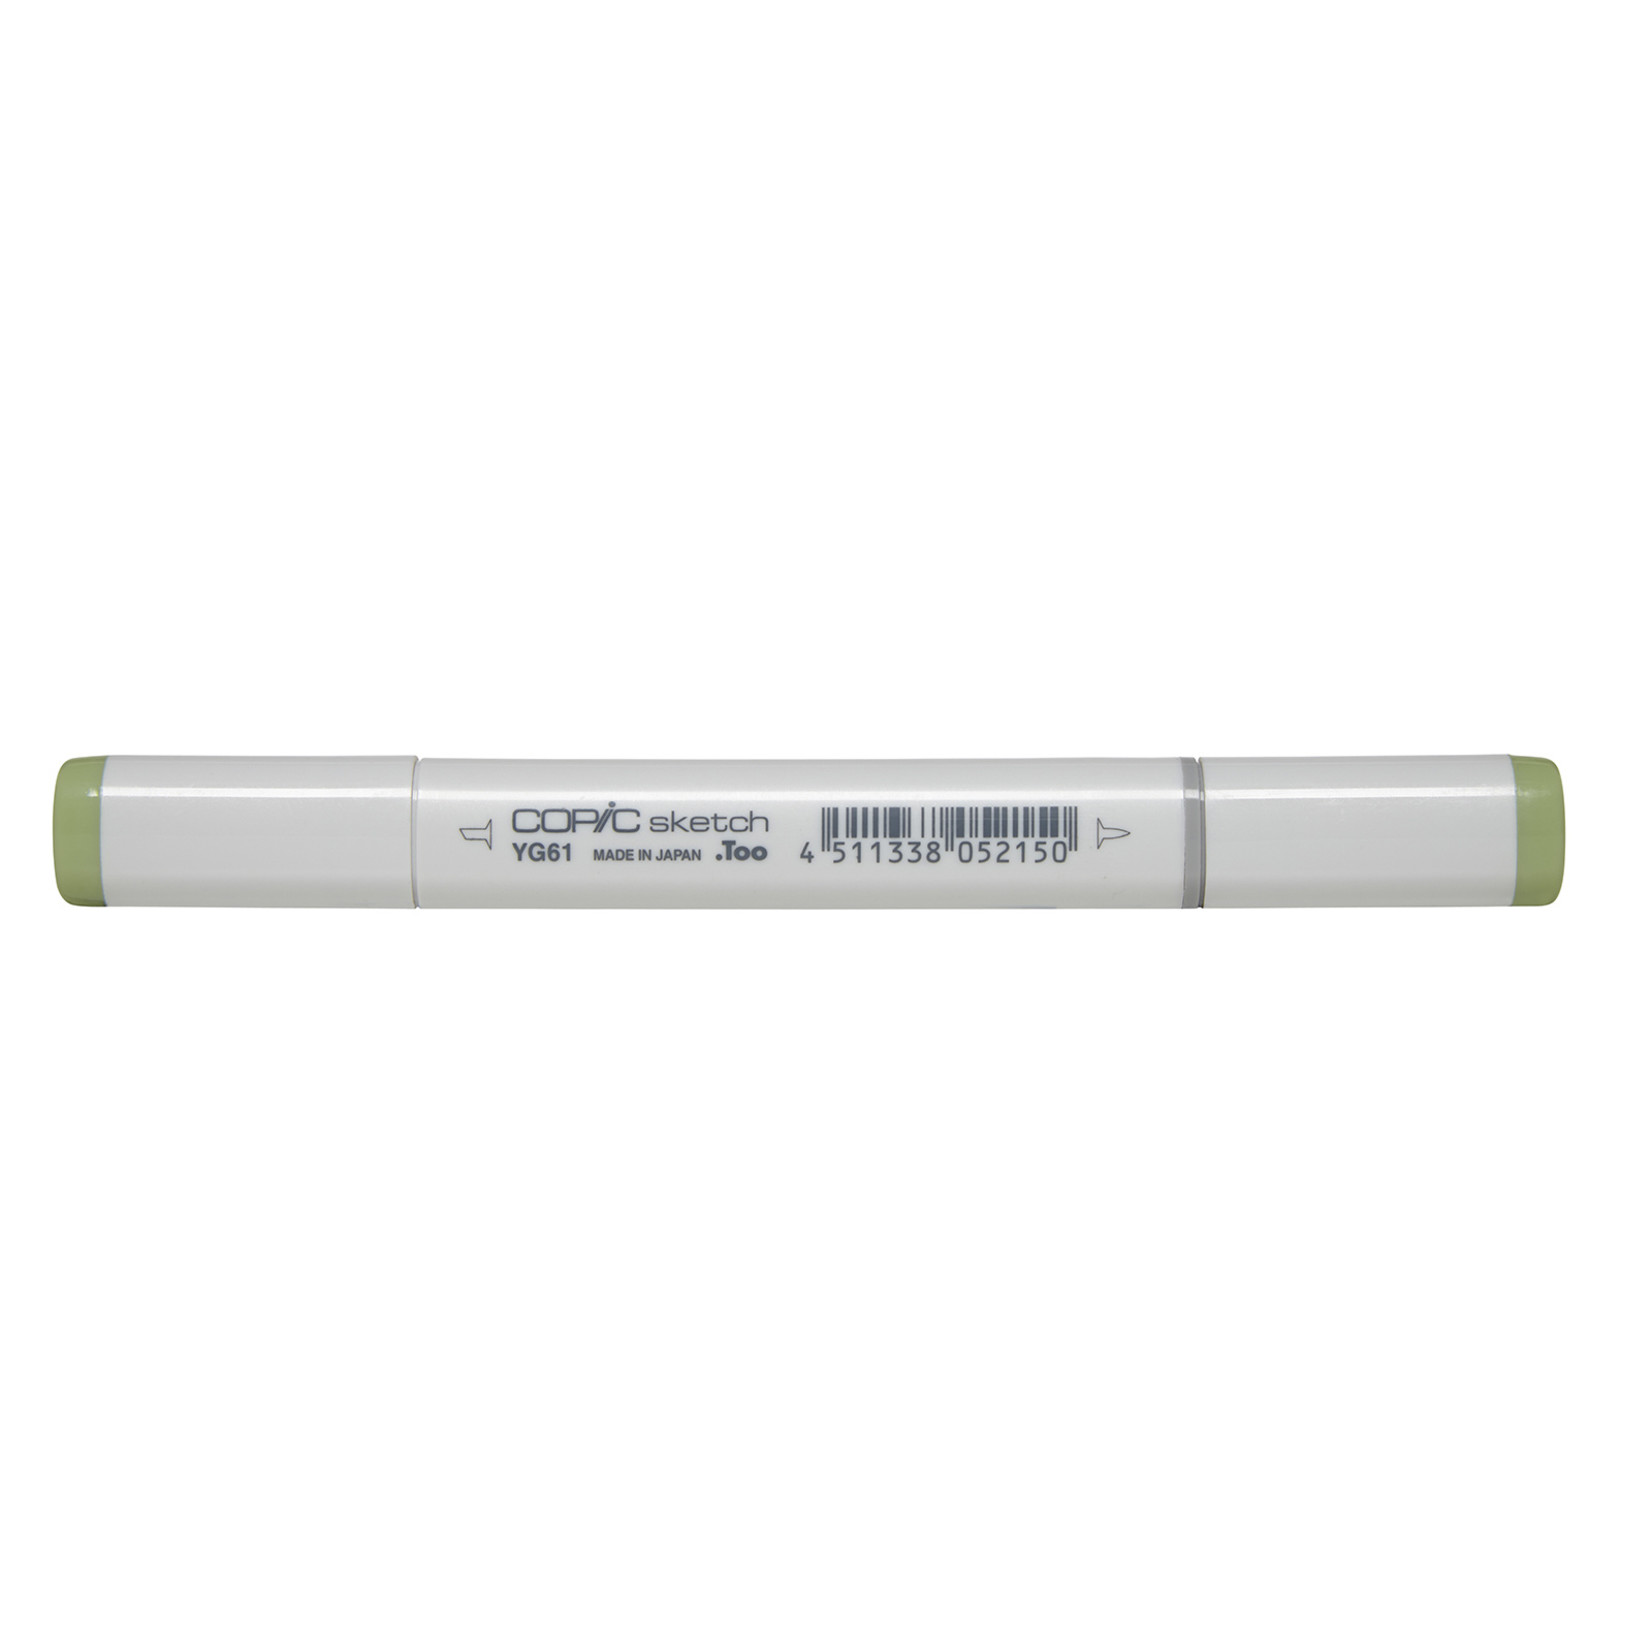 COPIC COPIC SKETCH YG61 PALE MOSS